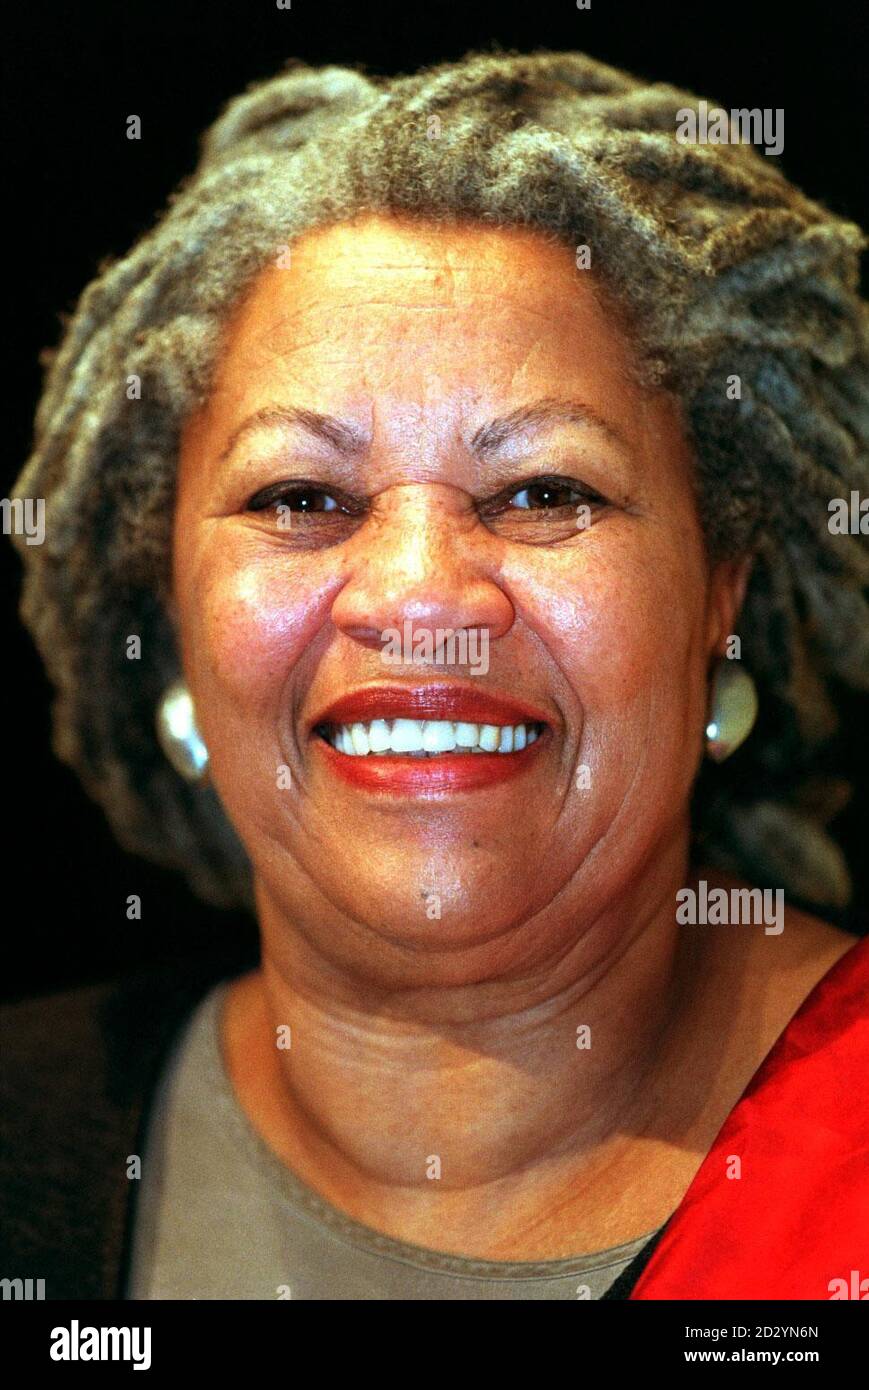 PA NEWS PHOTO 26/5/98 AMERICAN AUTHOR TONI MORRISON, WINNER OF BOTH THE PULITZER AND THE NOBEL PRIZE FOR LITERATURE, PICTURED DURING AN INTERVIEW AND A PHOTOCALL AT THE QUEEN ELIZABETH HALL, LONDON. 14/08/04: Toni Morrison is among a group of writers set to appear at a top literary festival. The Edinburgh International Book Festival is celebrating its 21st anniversary year with a star-studded cast of speakers from across the literary spectrum. The festival - which coincides with the Fringe, international and film festivals being held in the city during August - features more than 500 authors Stock Photo